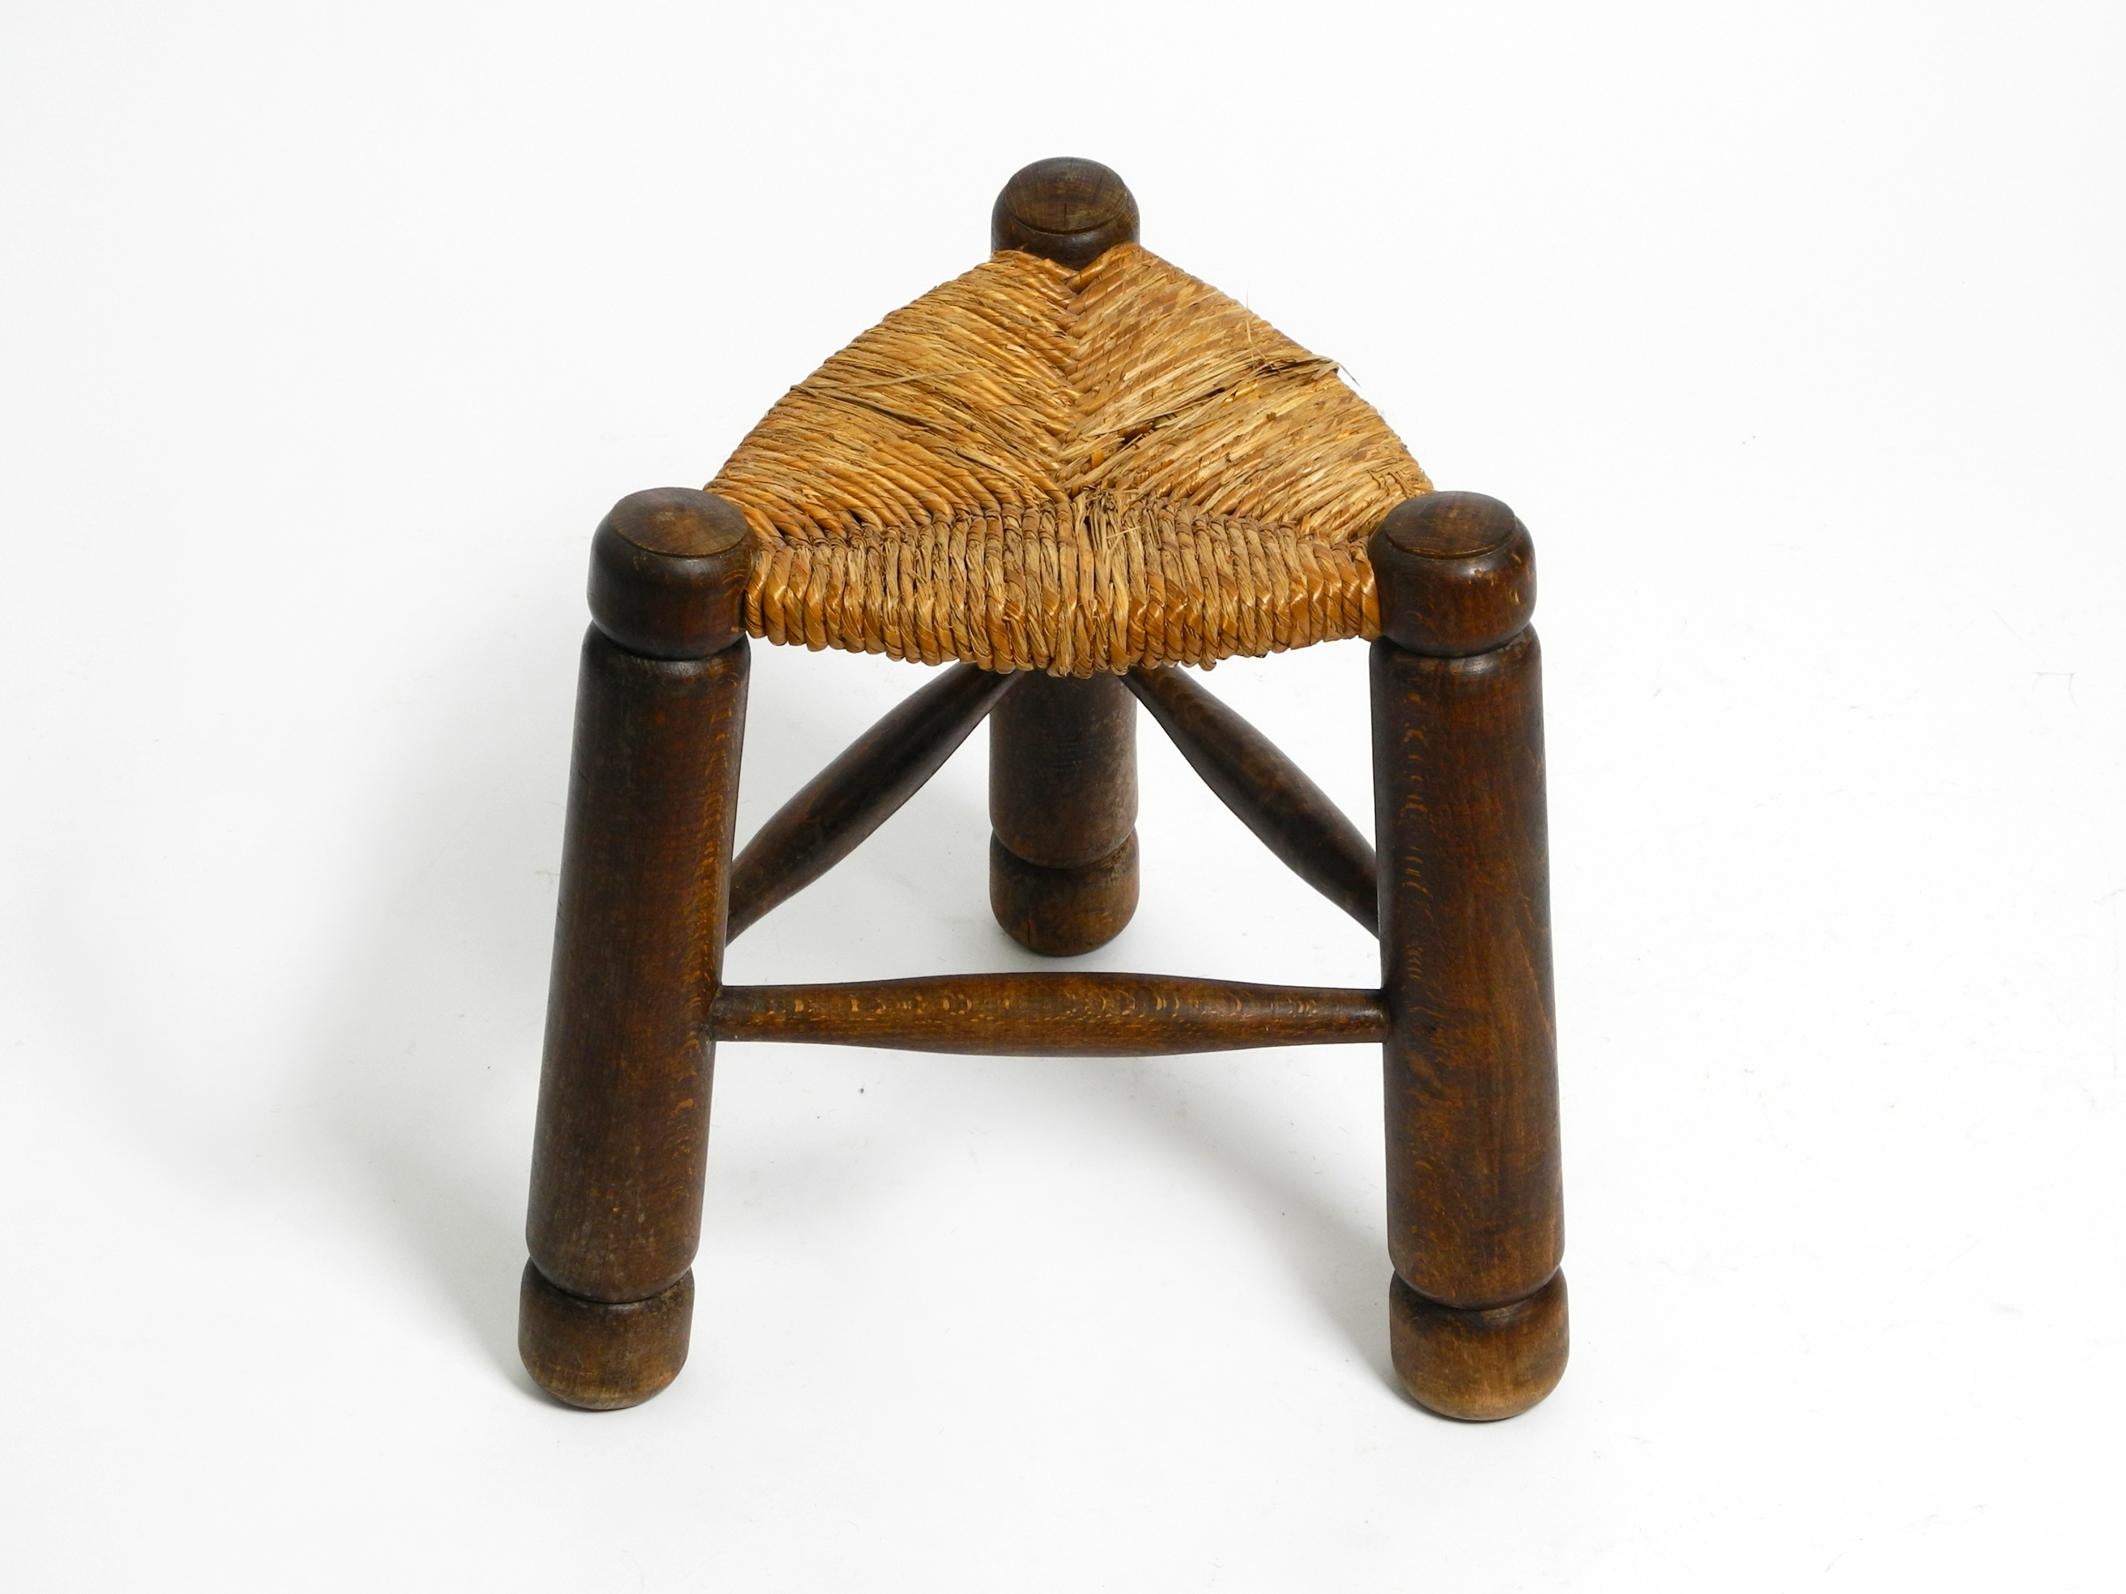 Beautiful original 1930s small soilid oak wood tripod stool with a rush weave seating.
Great minimalist design from a French production.
In good condition with no damage to the wooden frame.
Not wobbly, rushes are slightly flawed in one place as